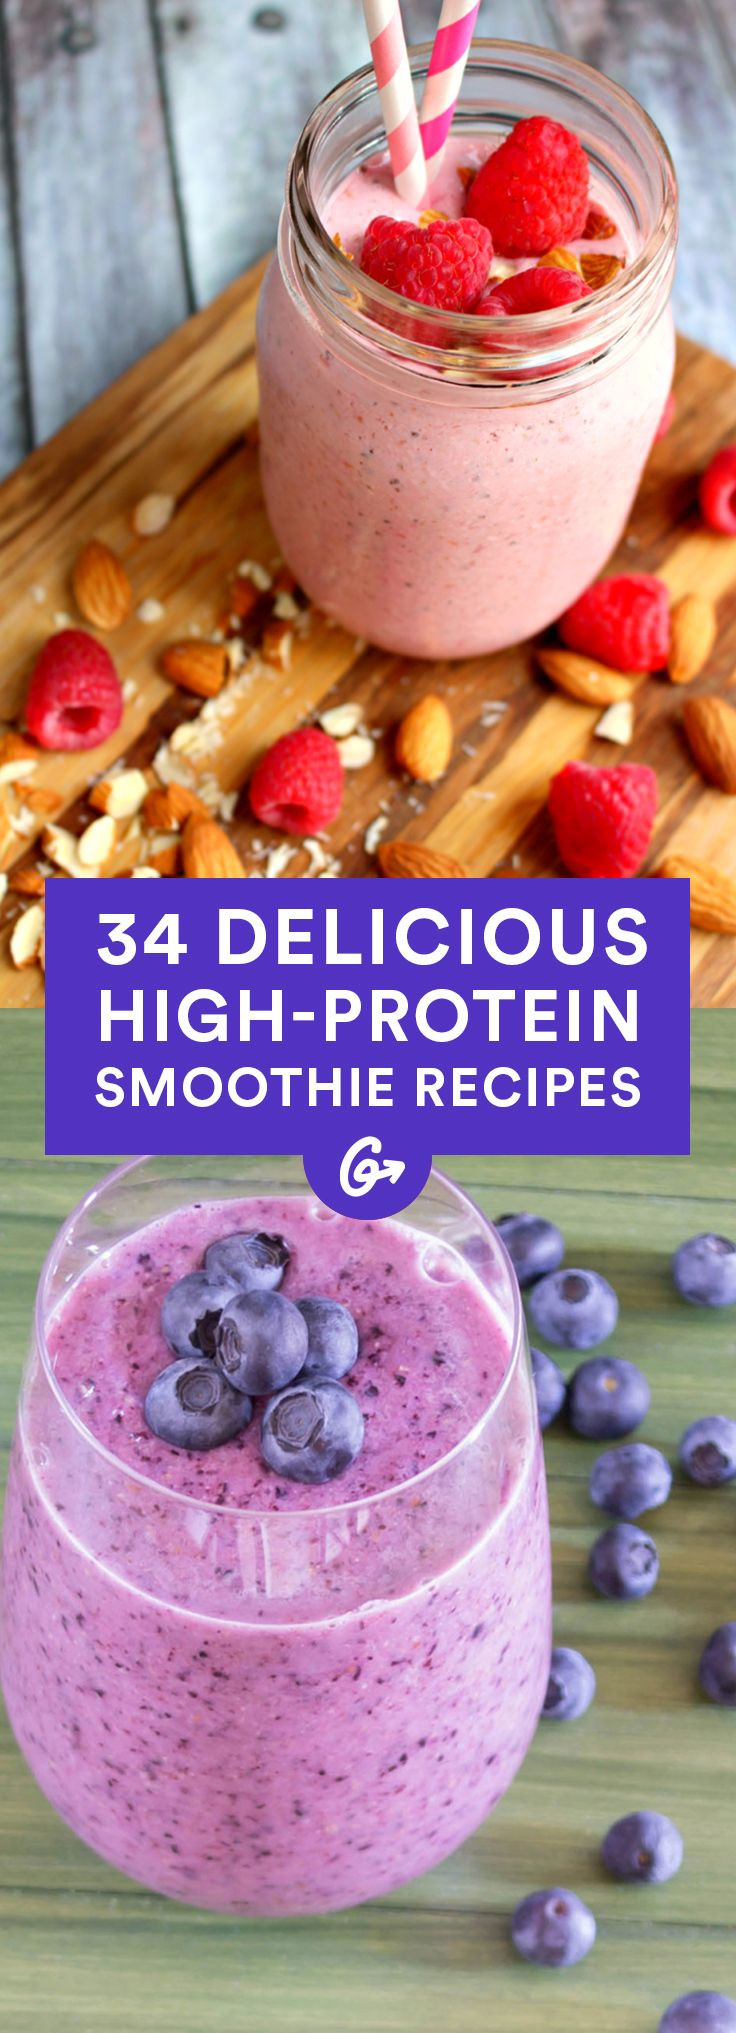 Breakfast Protein Smoothies
 34 High Protein Smoothie Recipes That Are Easy to Make